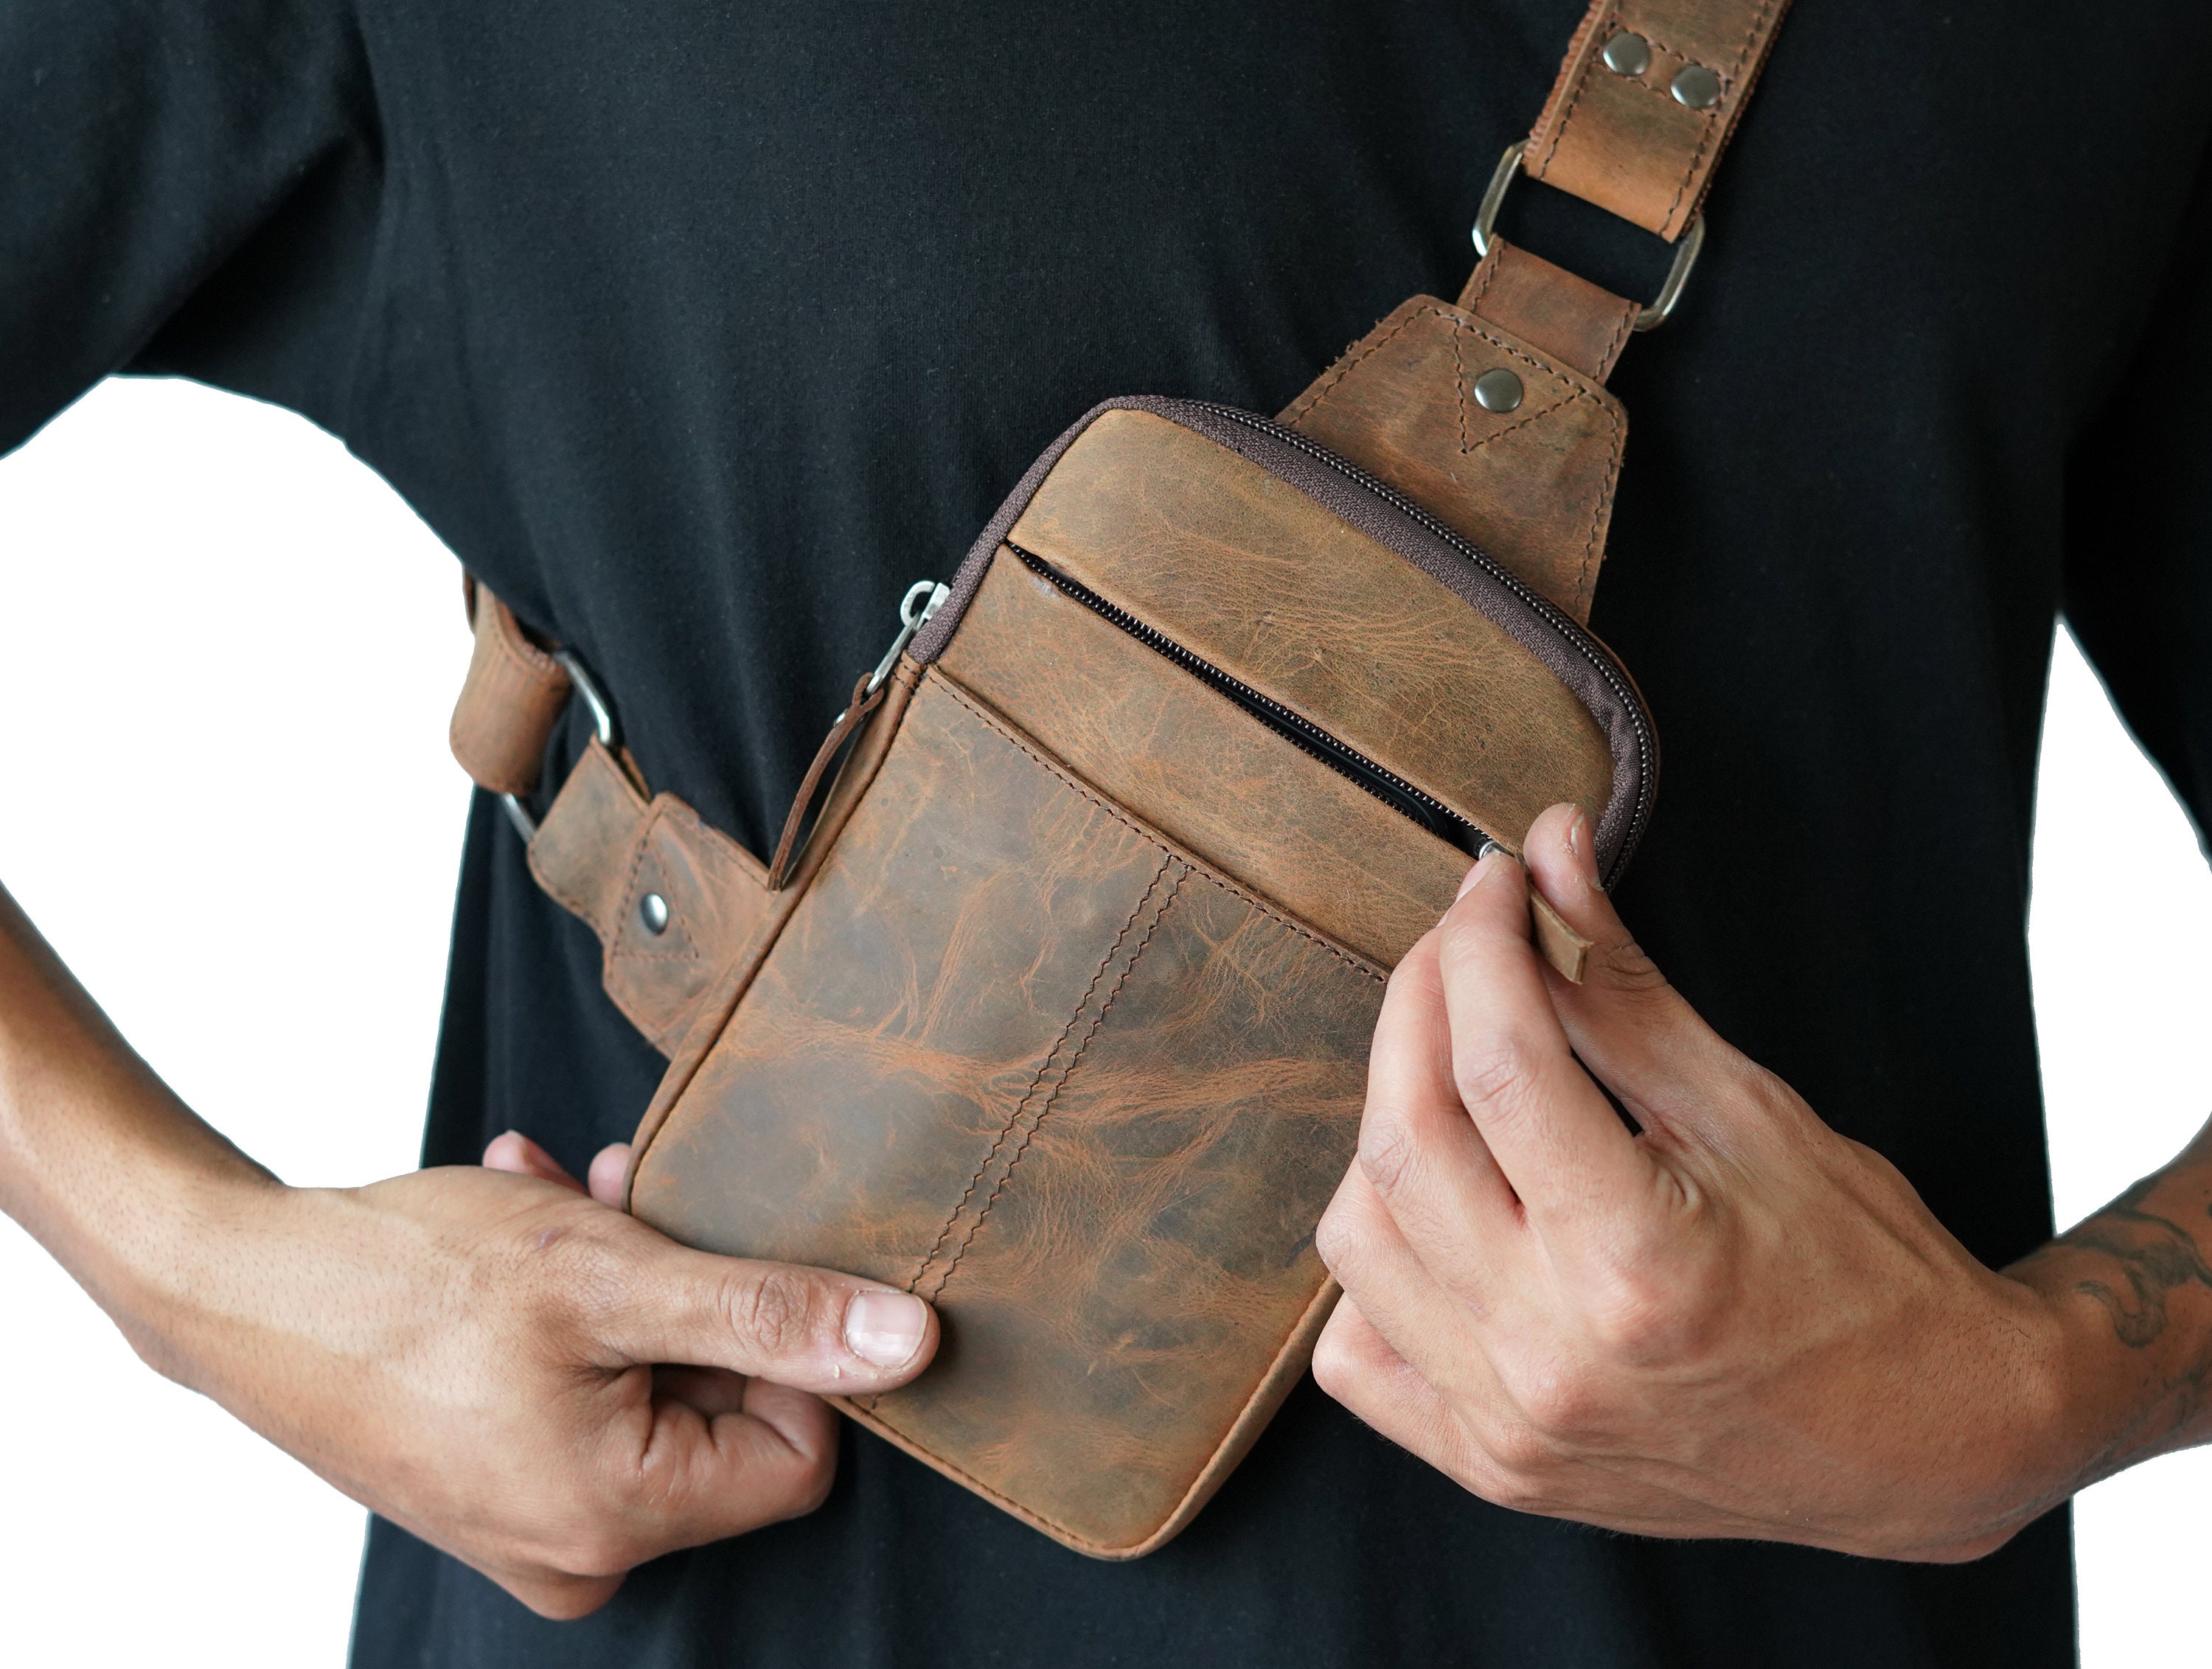 TheCompanion Travel Bag - Light Brown - Buy Online